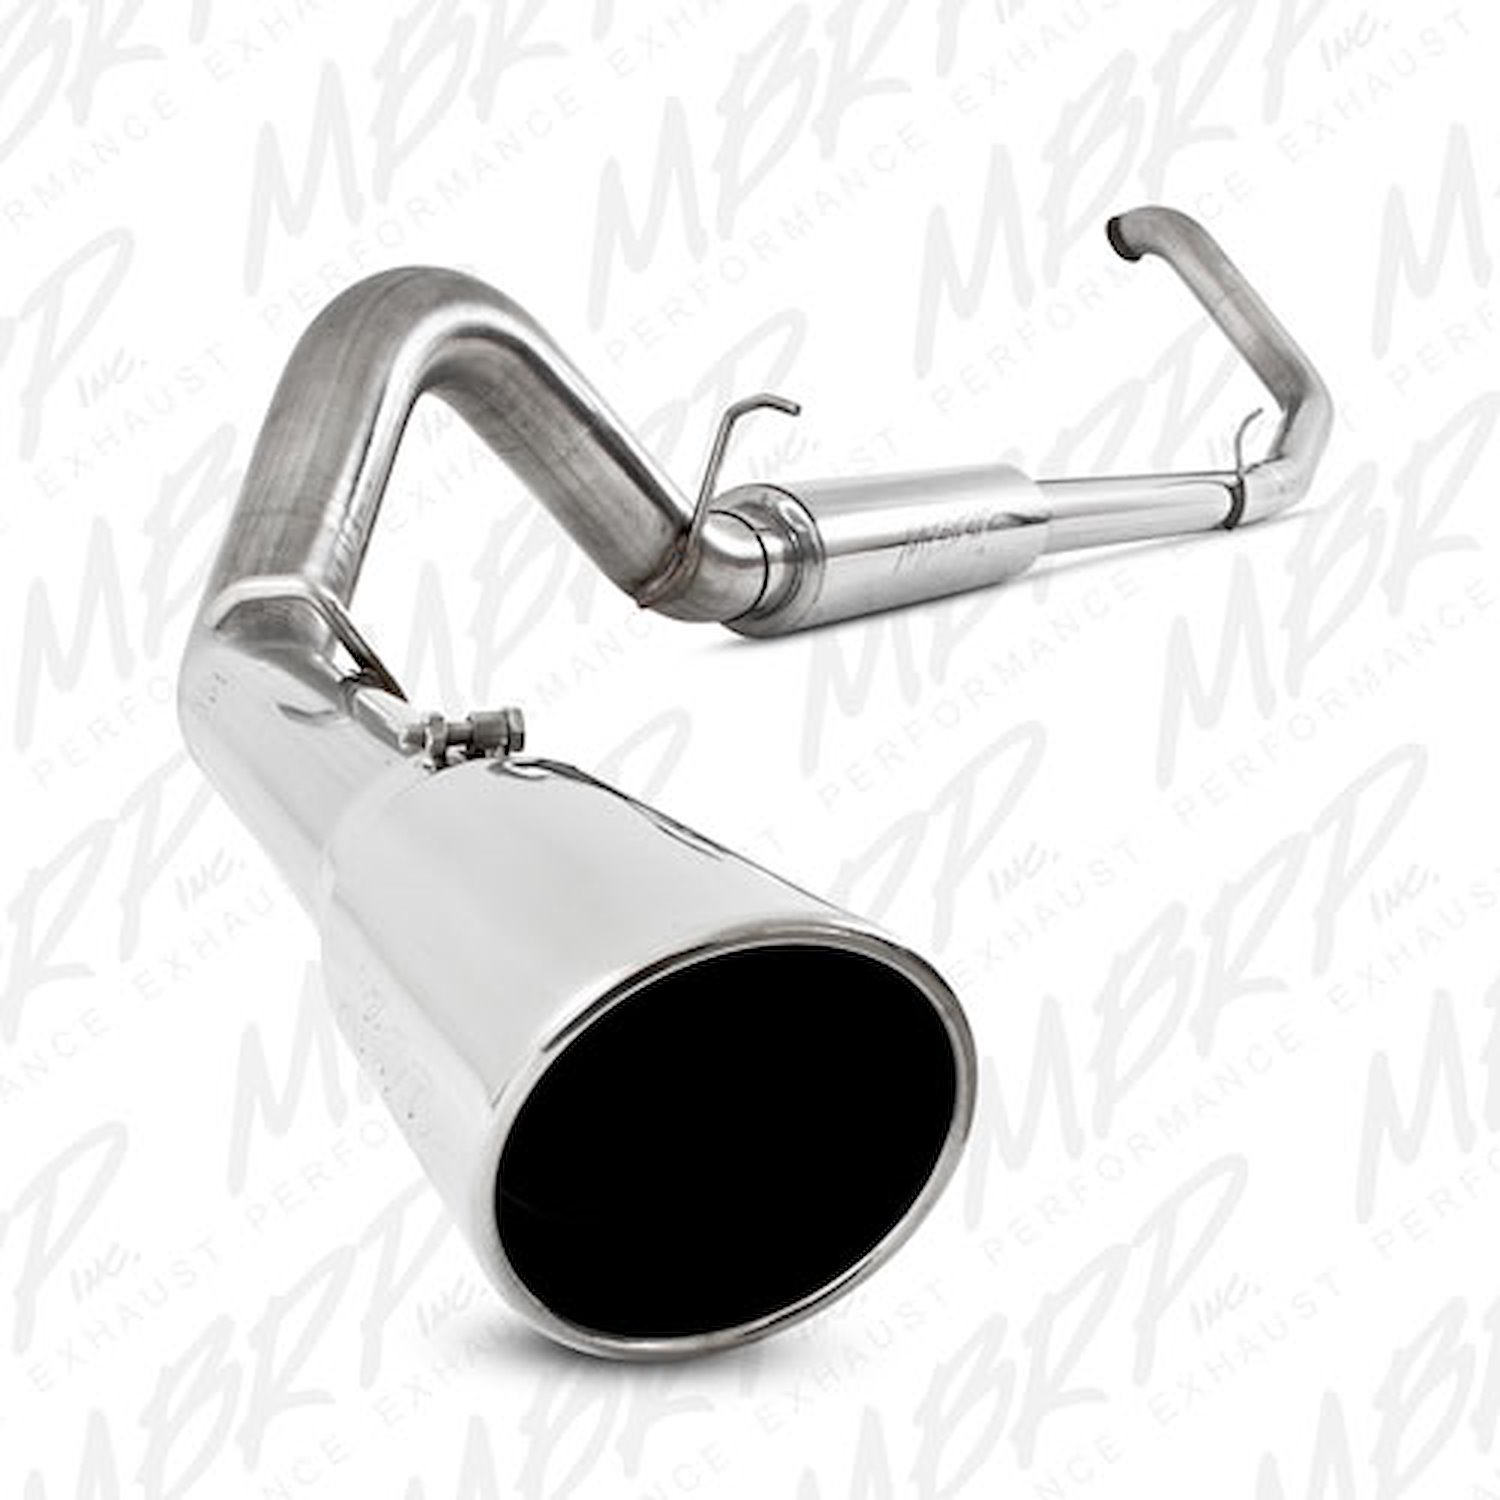 XP Series Exhaust System 1999-2003 Ford Excursion Powerstroke 7.3L